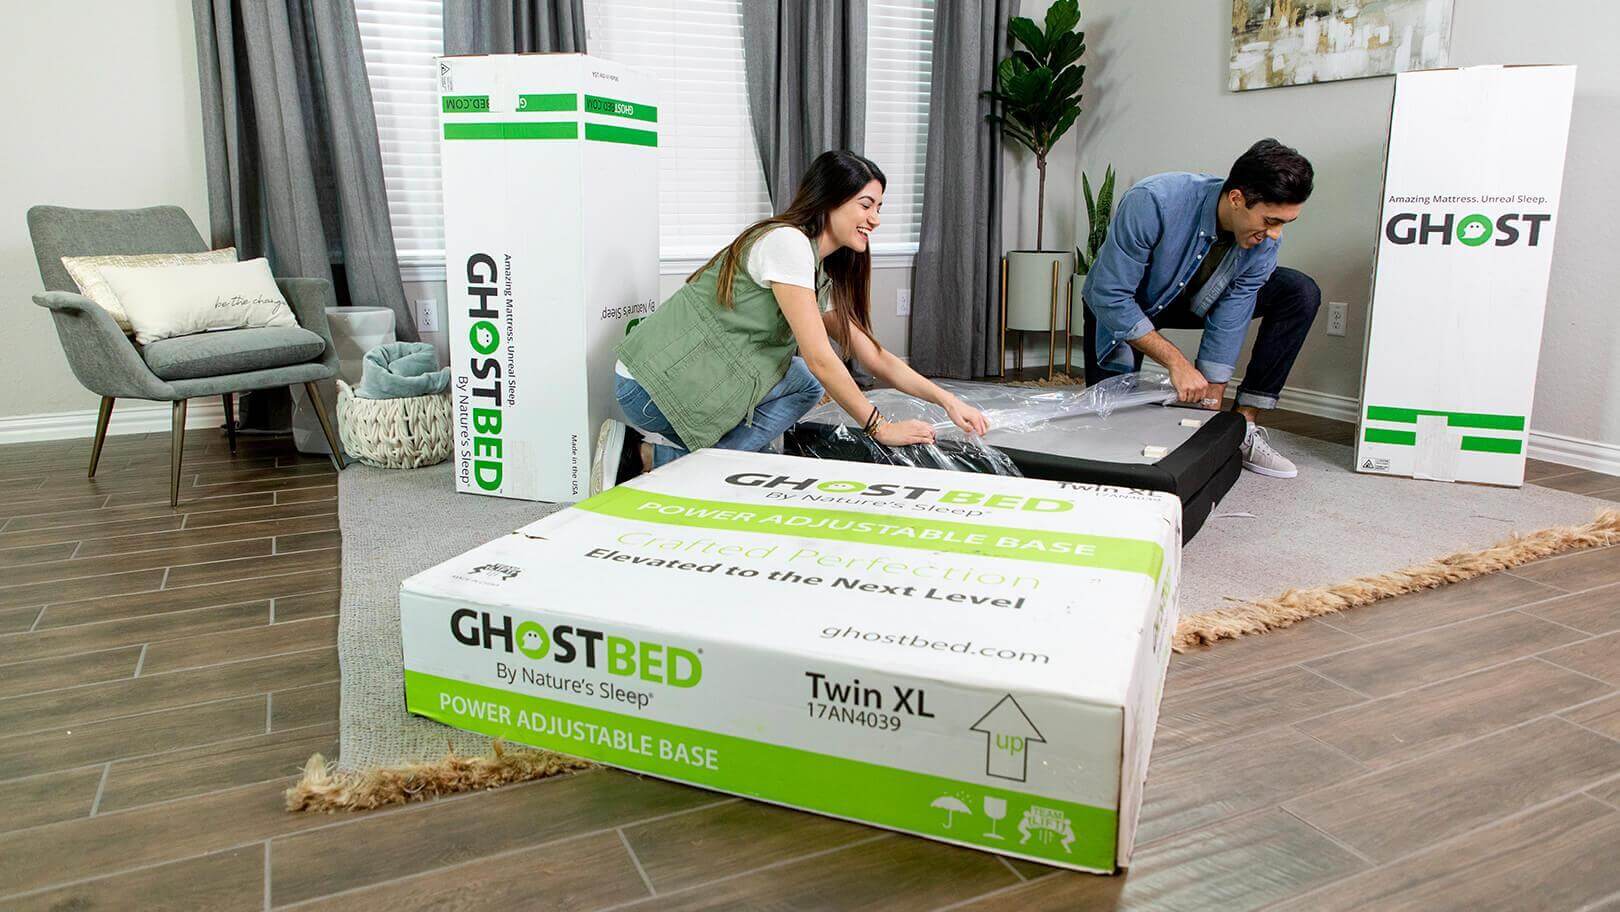 GhostBed Mattress Review in 2021- Pros, Cons & Analysis